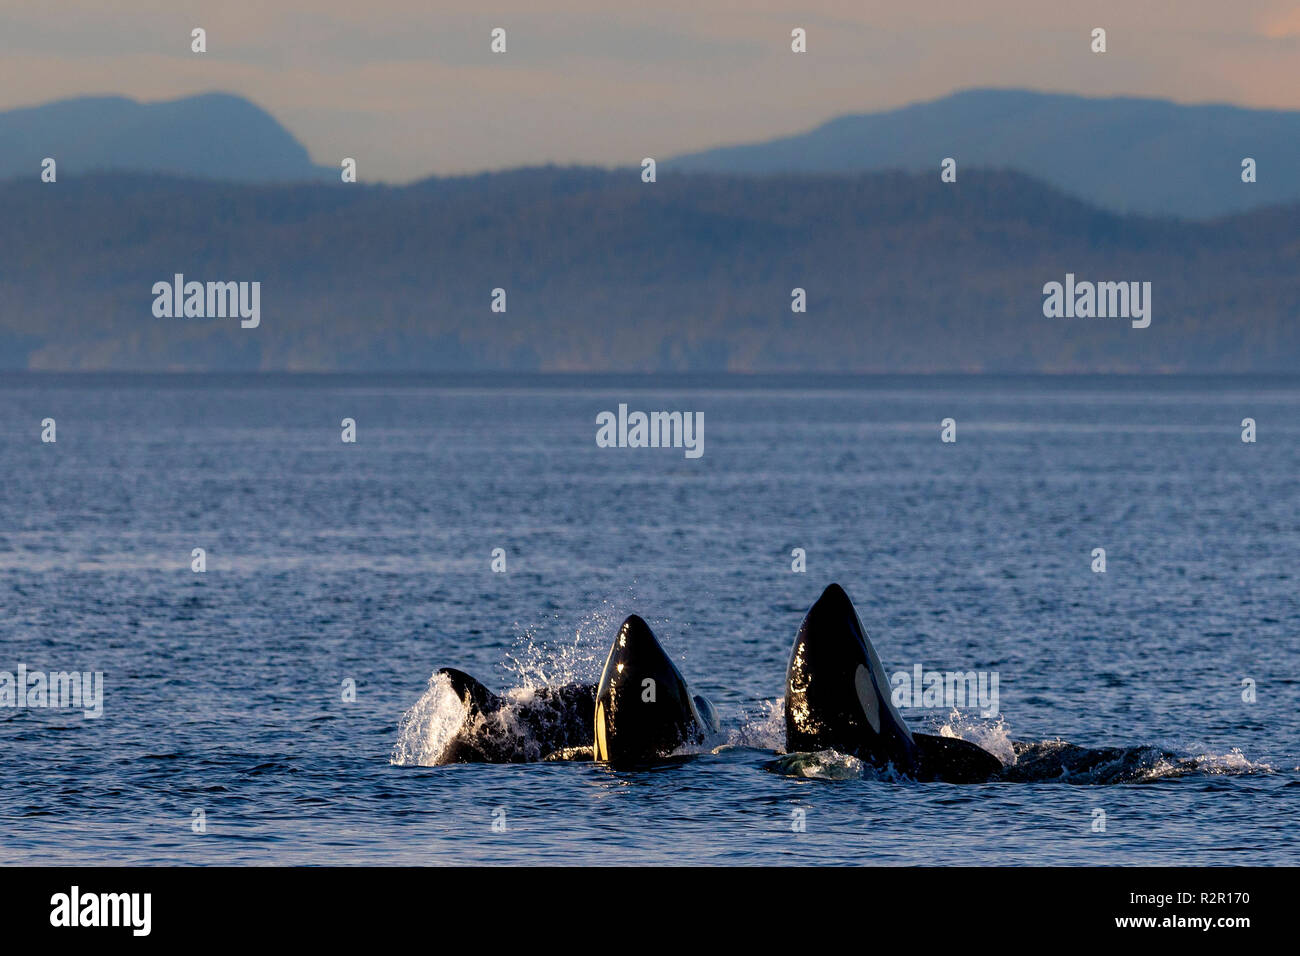 Northern resident orca whale pods (killer whales, Orcinus orca, A & G-clan) playing on a late afternoon in Queen Charlotte Strait along the British Columbia Coastal Mountains, Great Bear Rainforest, First Nations Territory, Vancouver Island, British Columbia, Canada Stock Photo